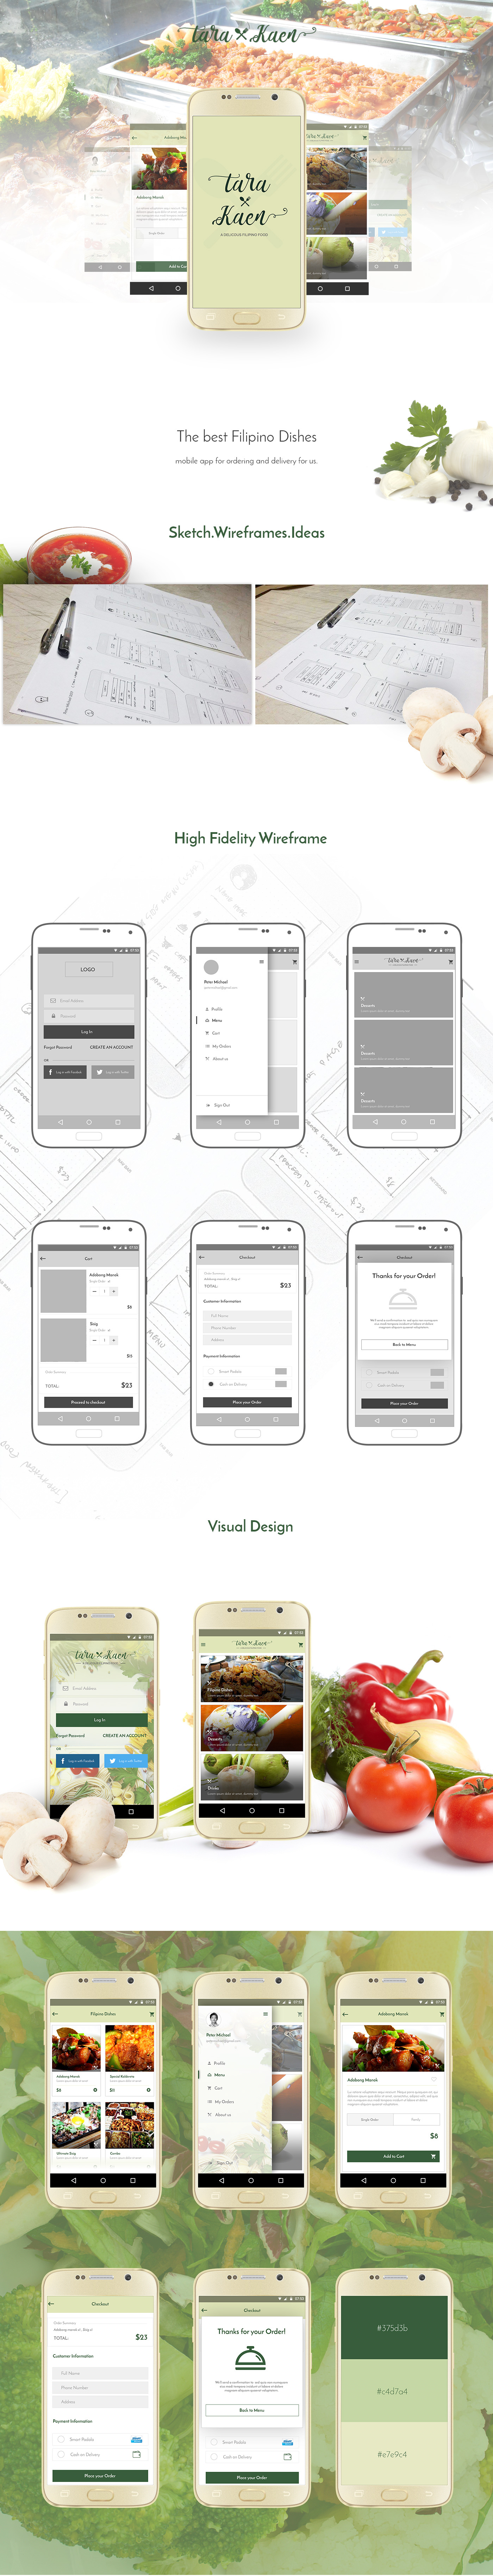 food app Mobile app ui ux wireframe clean ordering visual design android filipino graphic design 